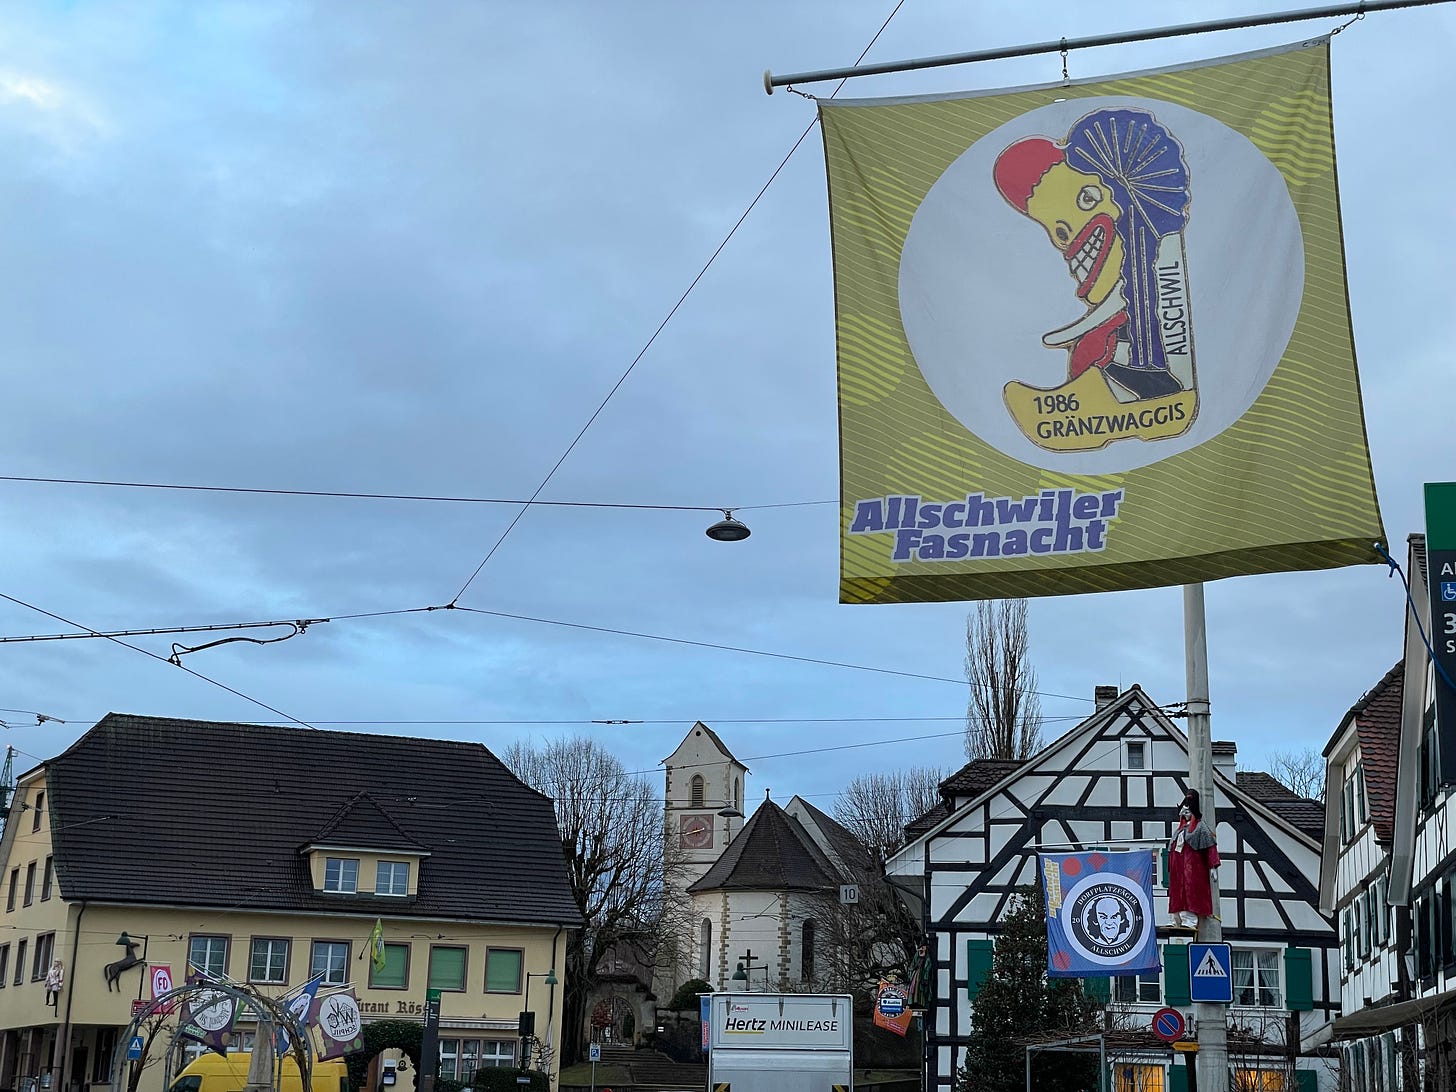 Allschwiler Fasnacht flag showing a Waggis in a clog with the words "1986 Gränzwaggis"